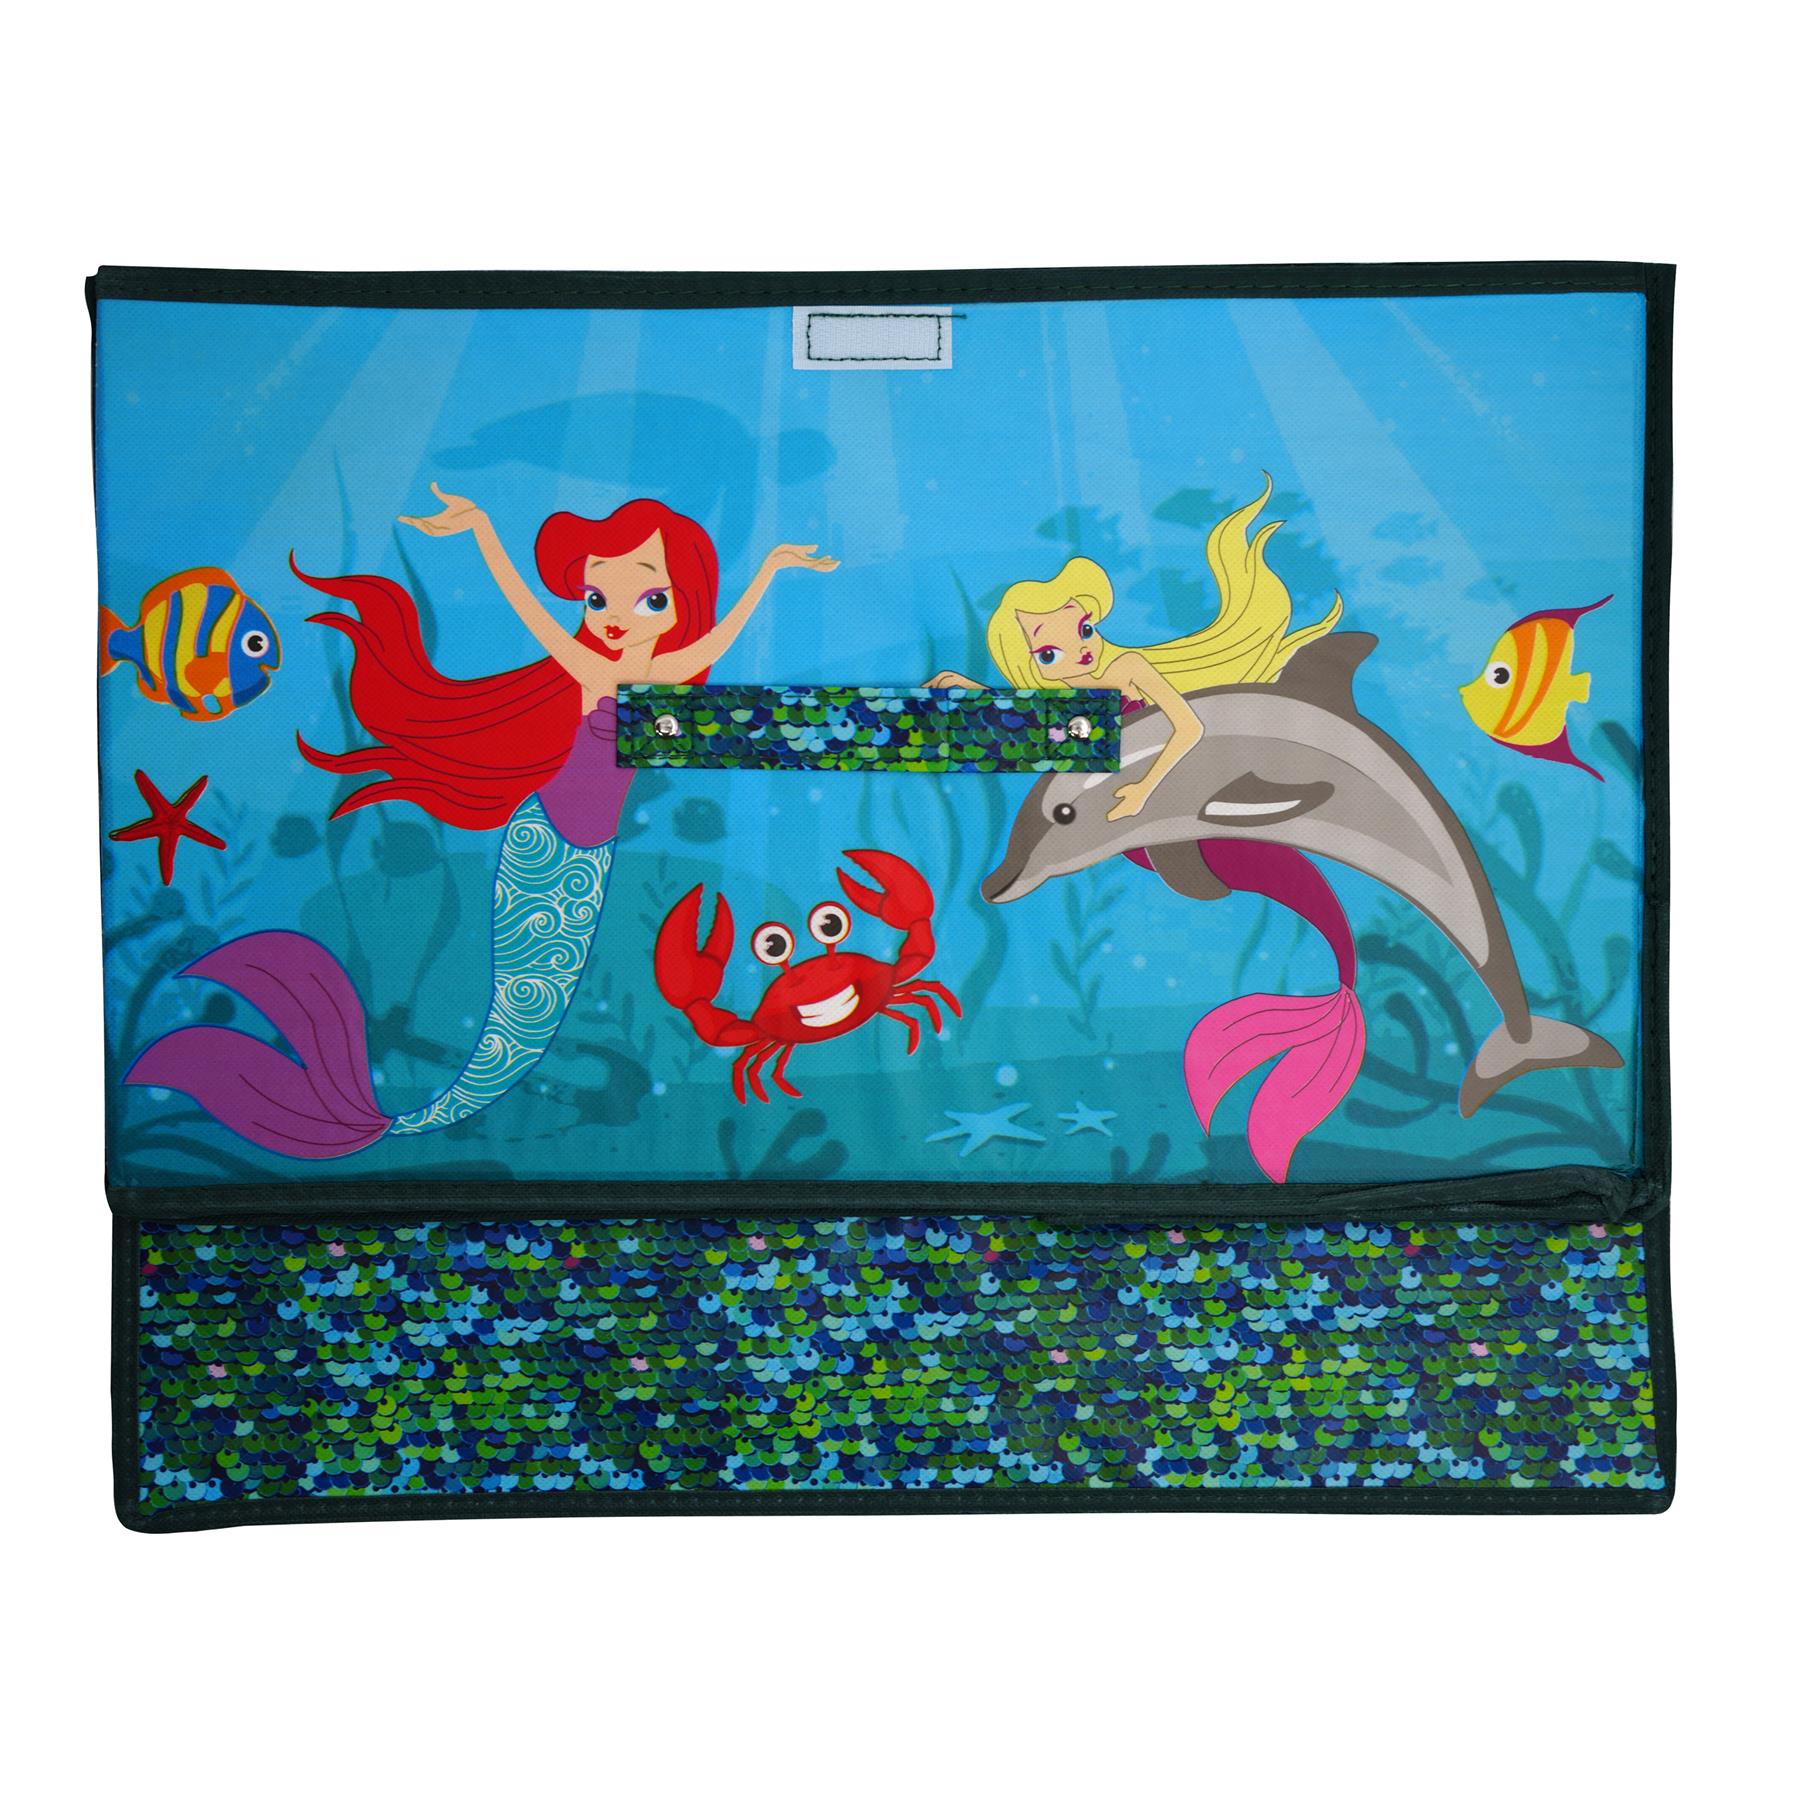 Marmaid Storage Box by The Magic Toy Shop - The Magic Toy Shop